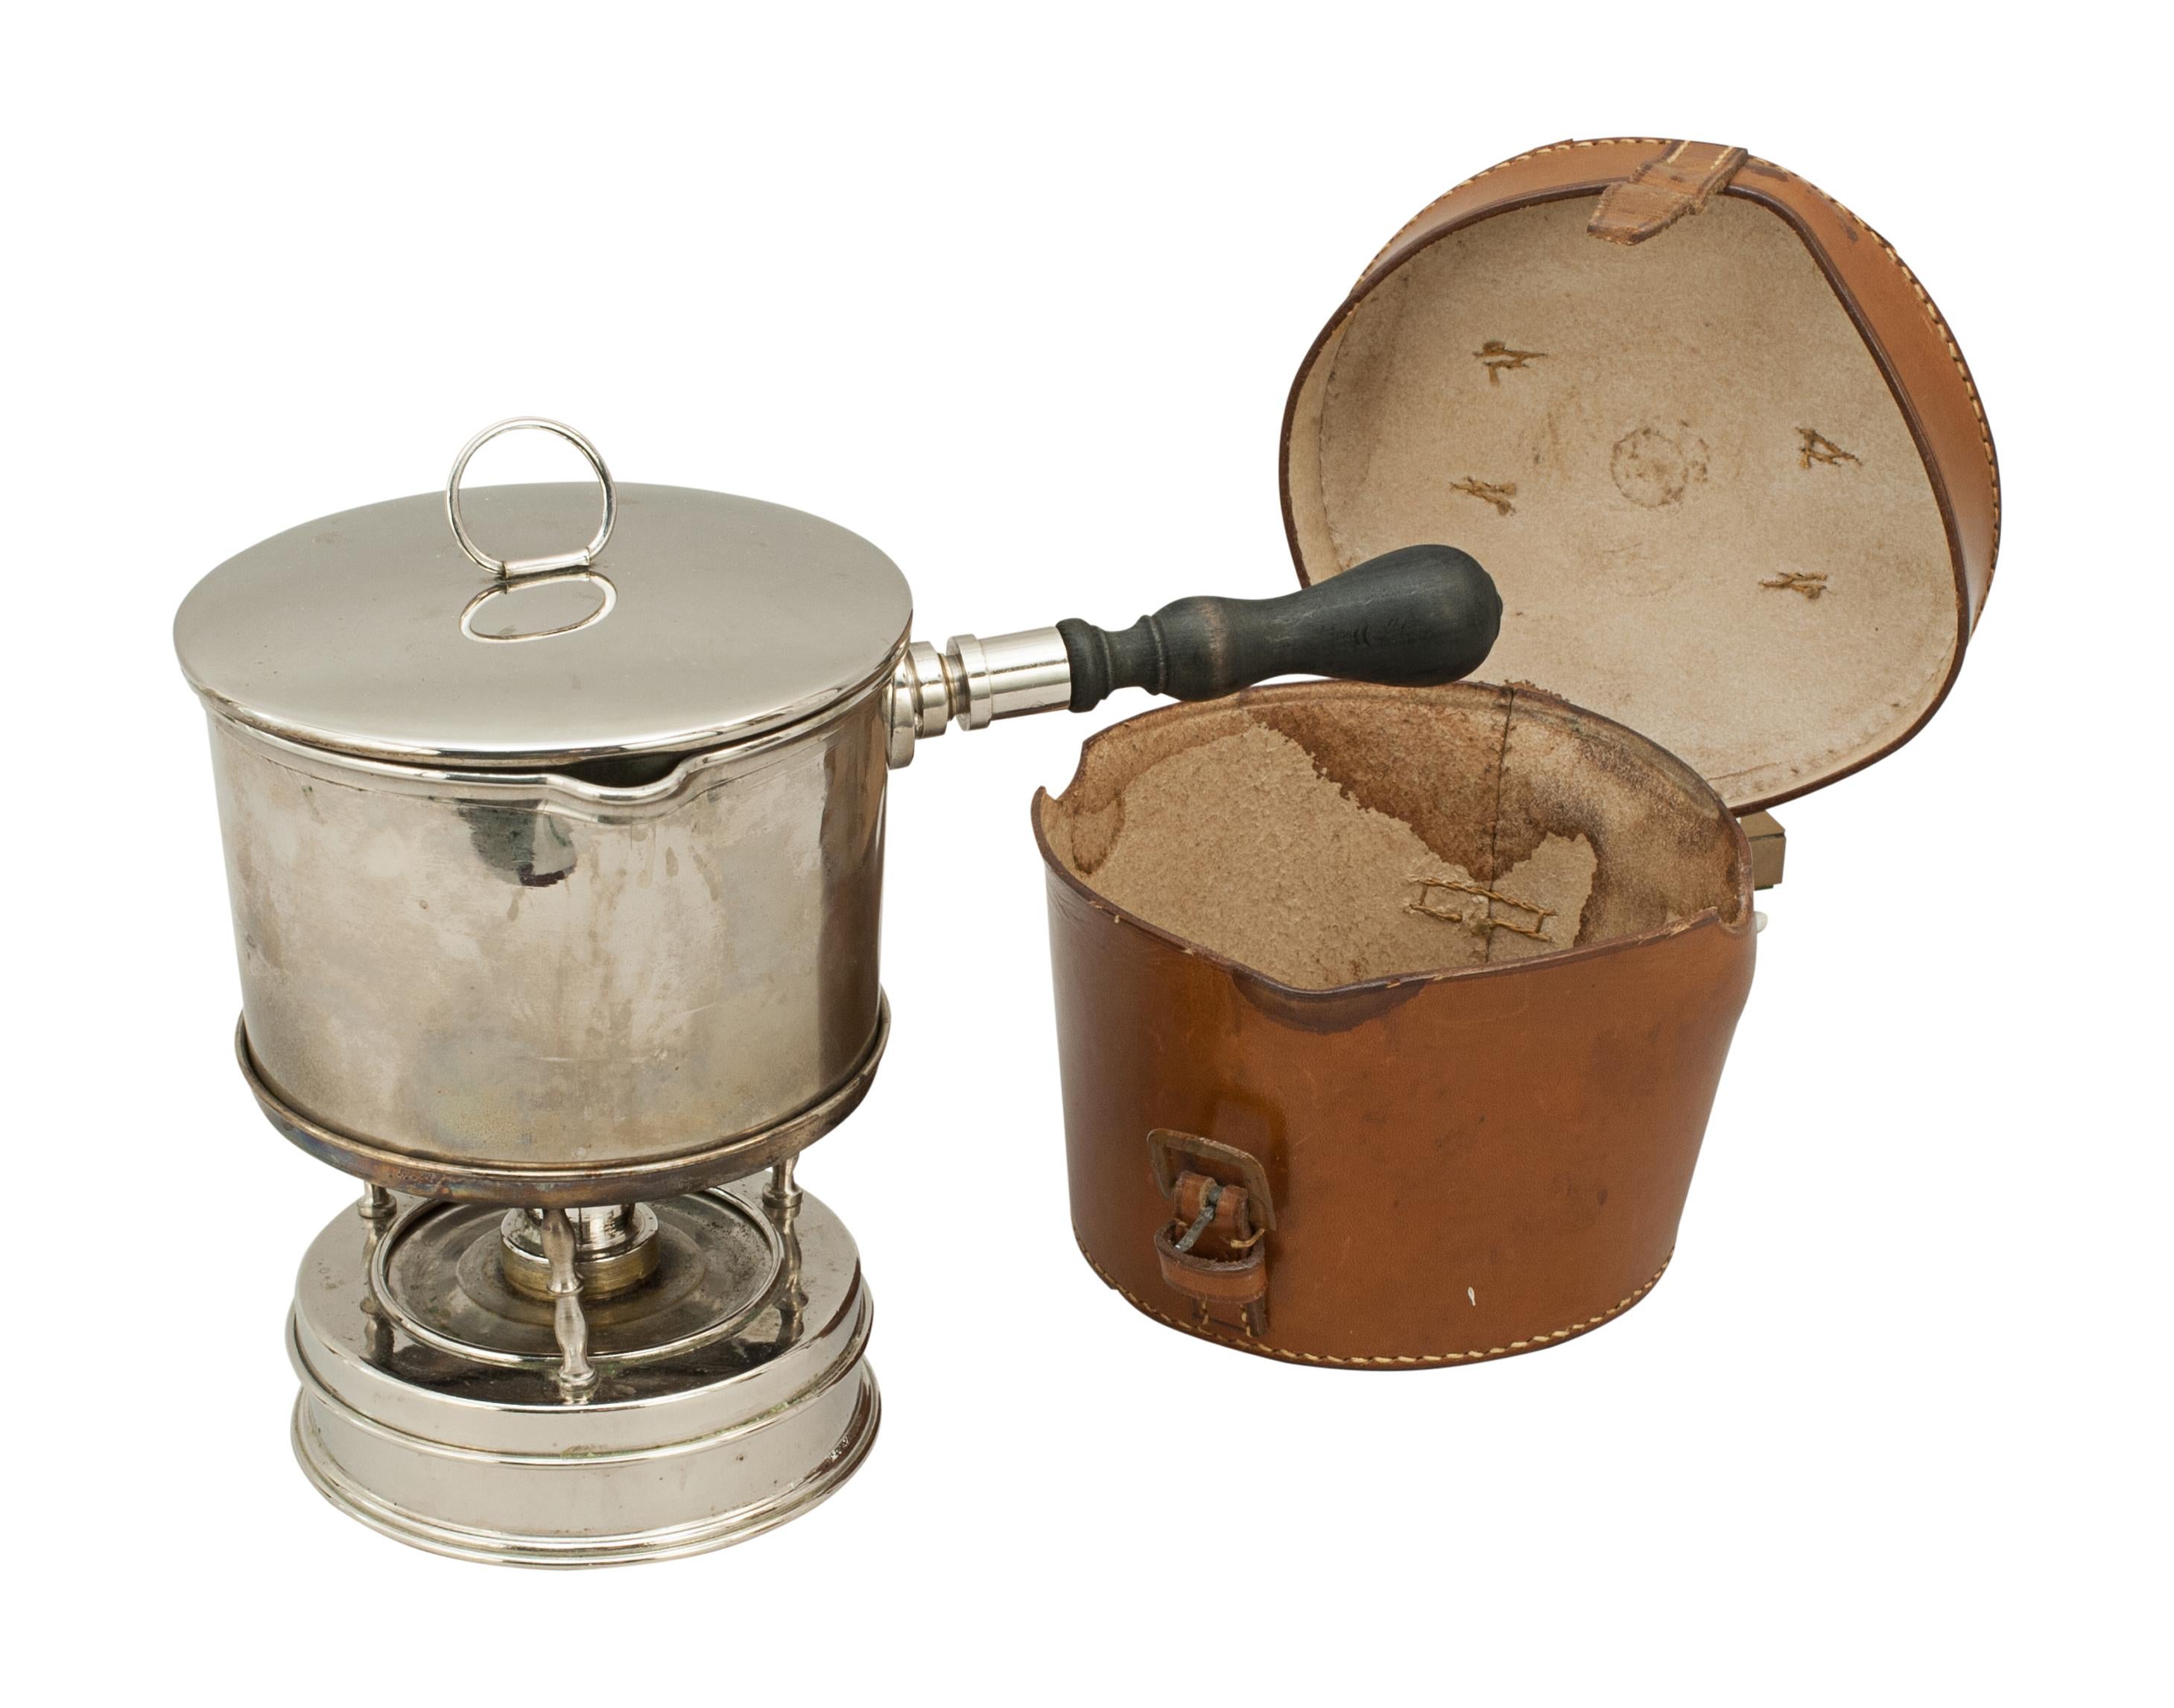 Army & Navy Campaign spirit stove with pan in original leather case.
An Army & Navy Cooperative Society Limited campaign/travelling spirit stove with sauce pan. The whole apparatus neatly packs into the leather travel case. The leather case is with